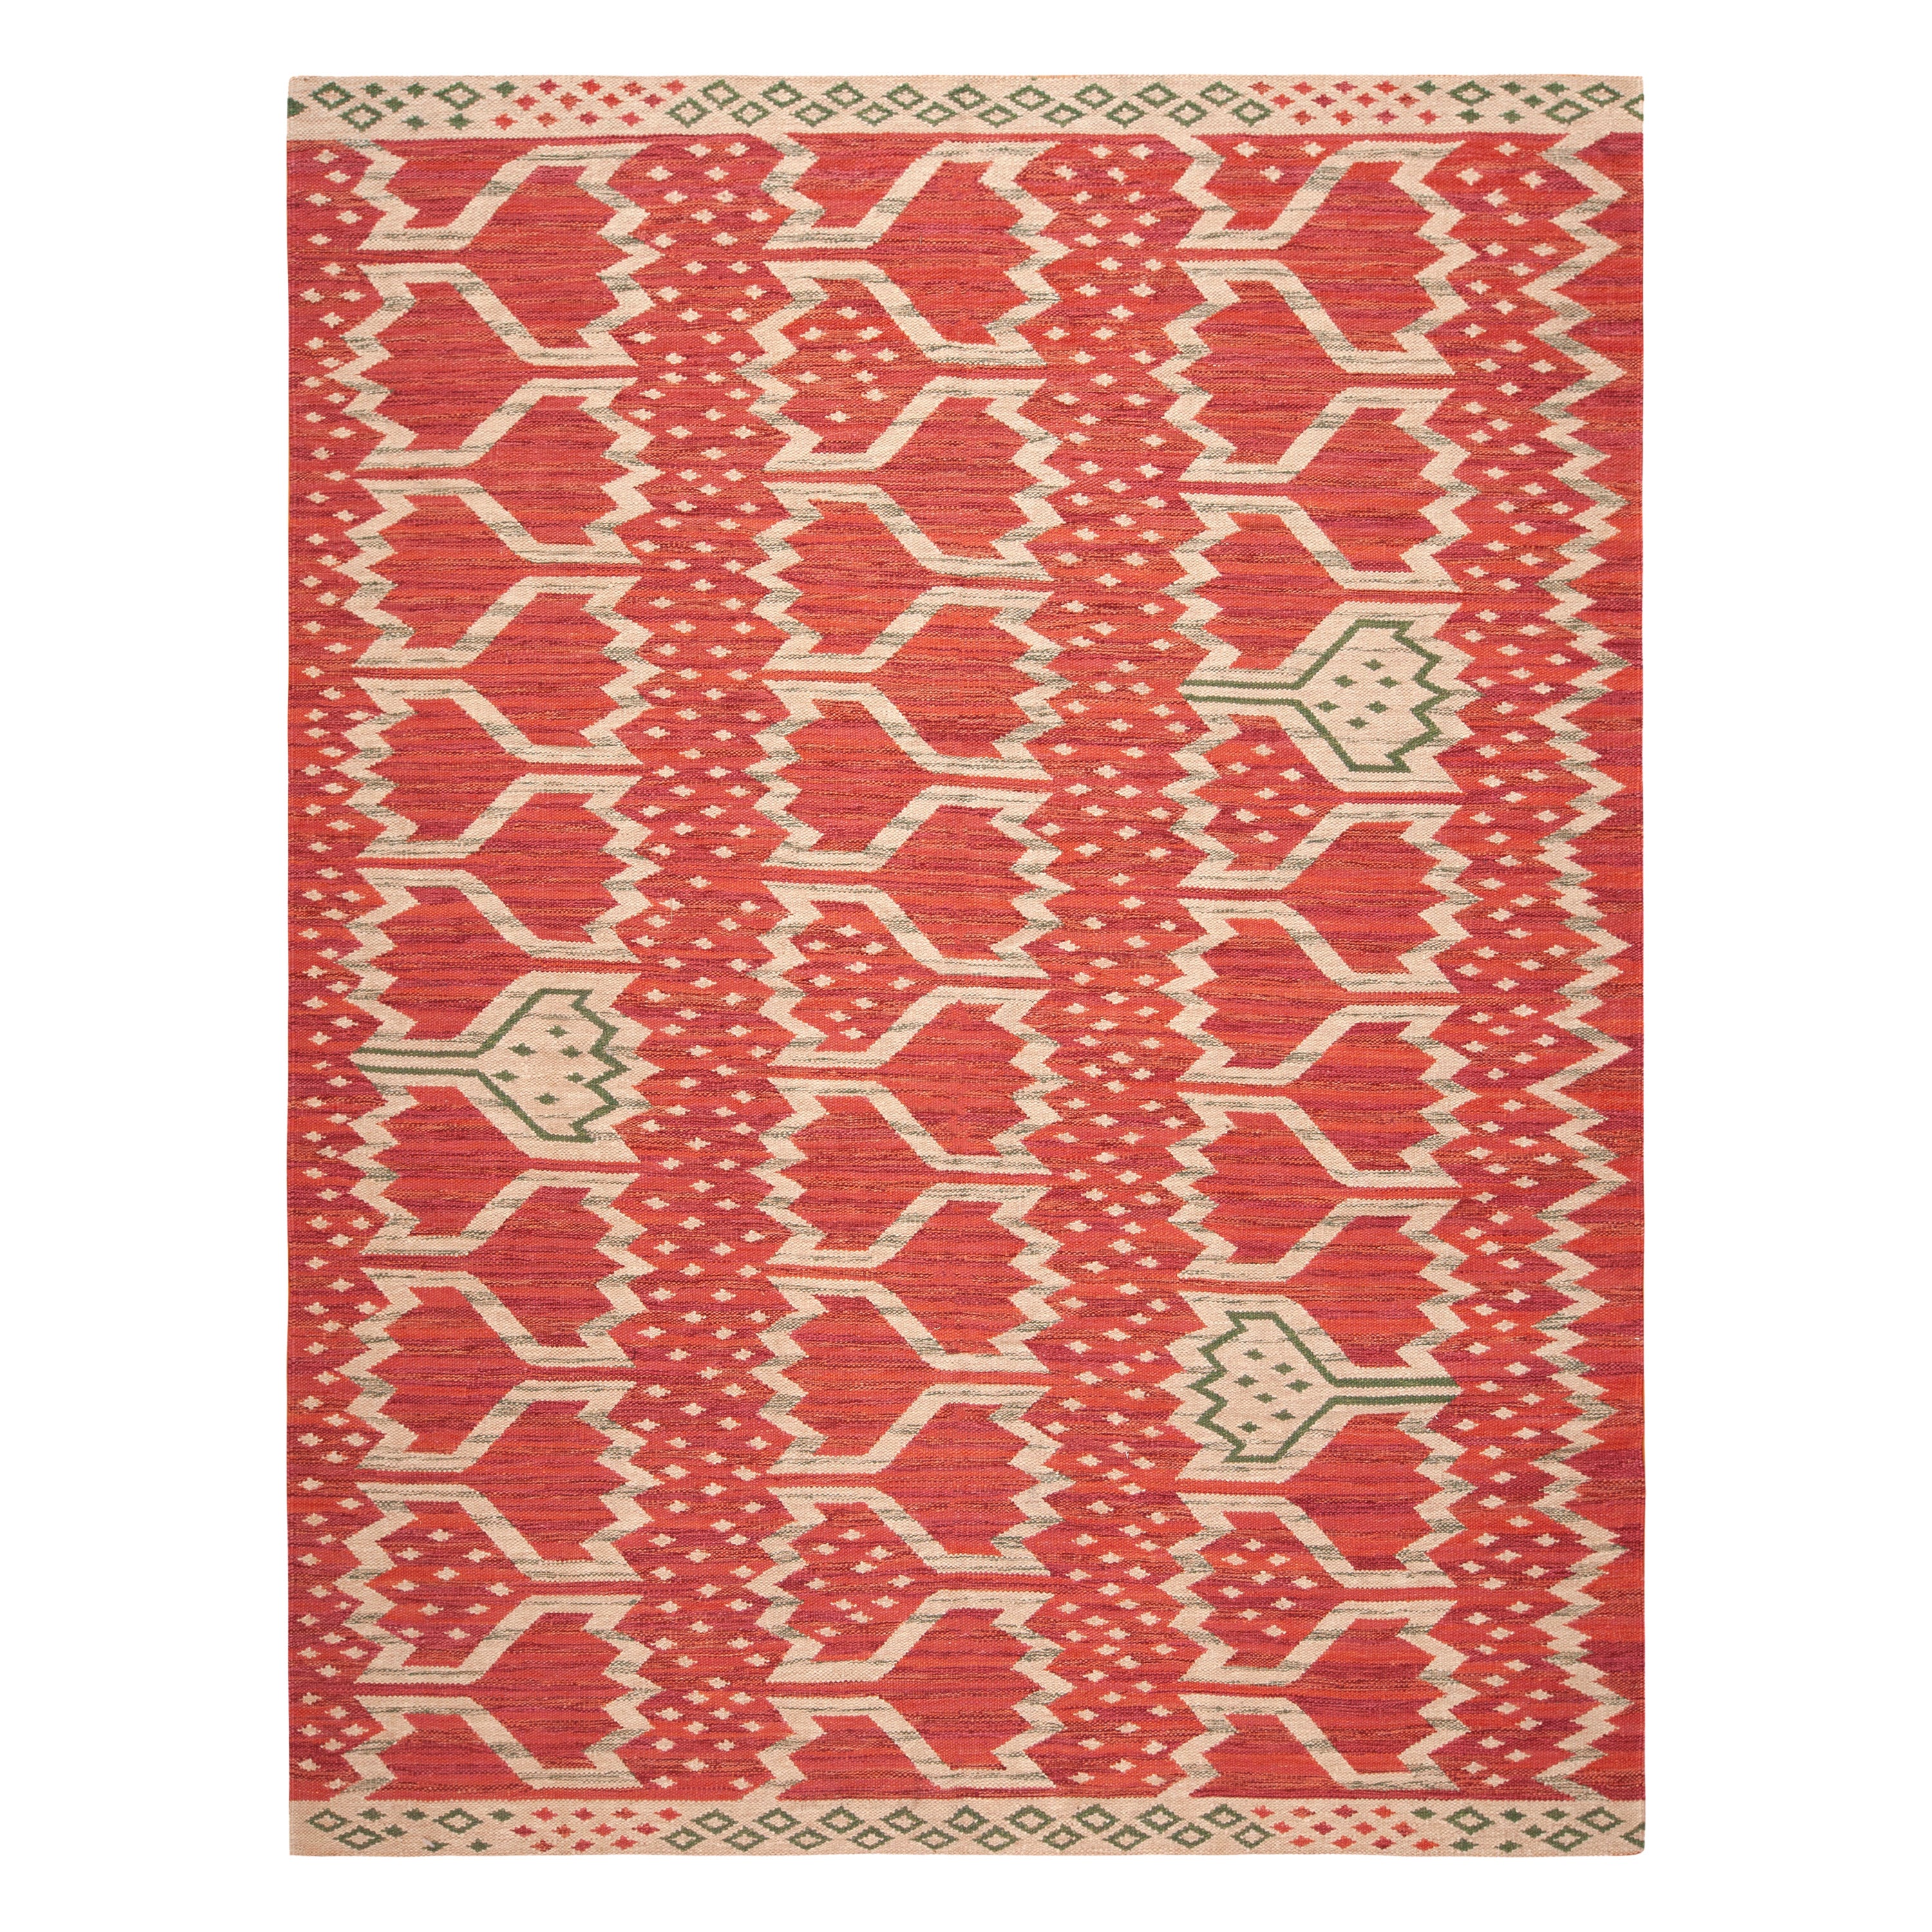 Nazmiyal Collection Central Asian Rugs